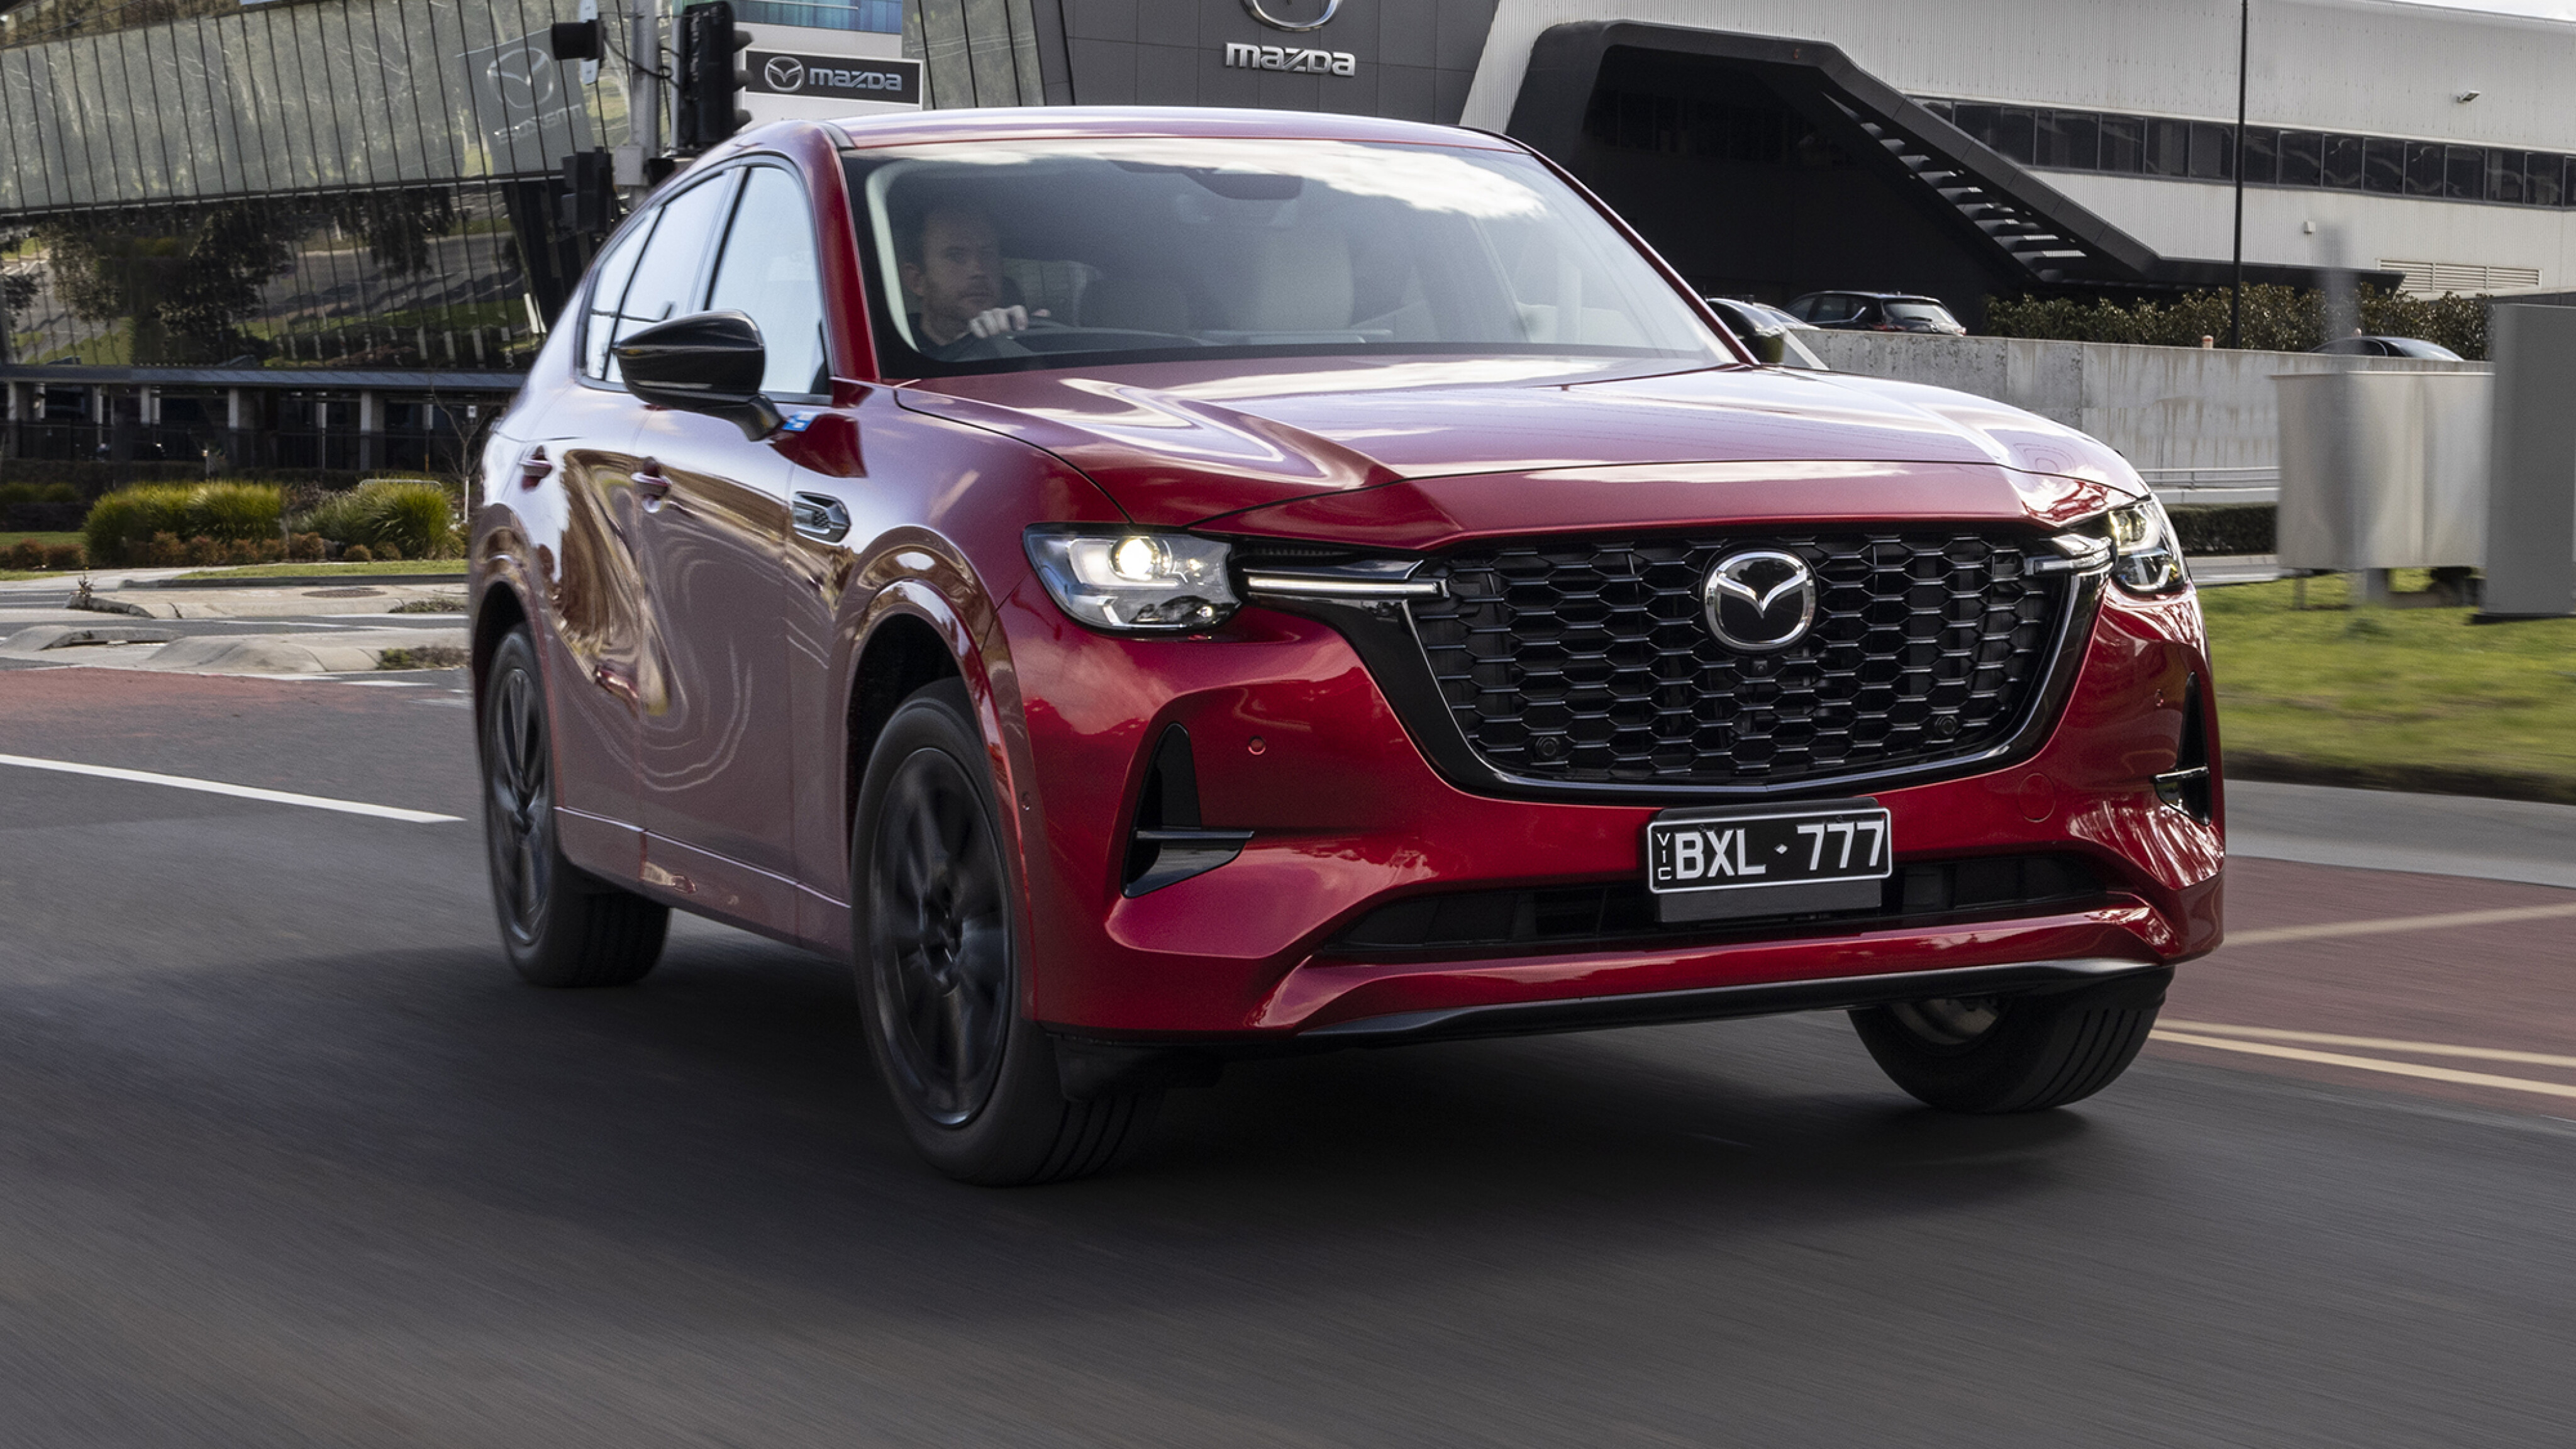 Mazda CX-60 dimensions, boot space and electrification